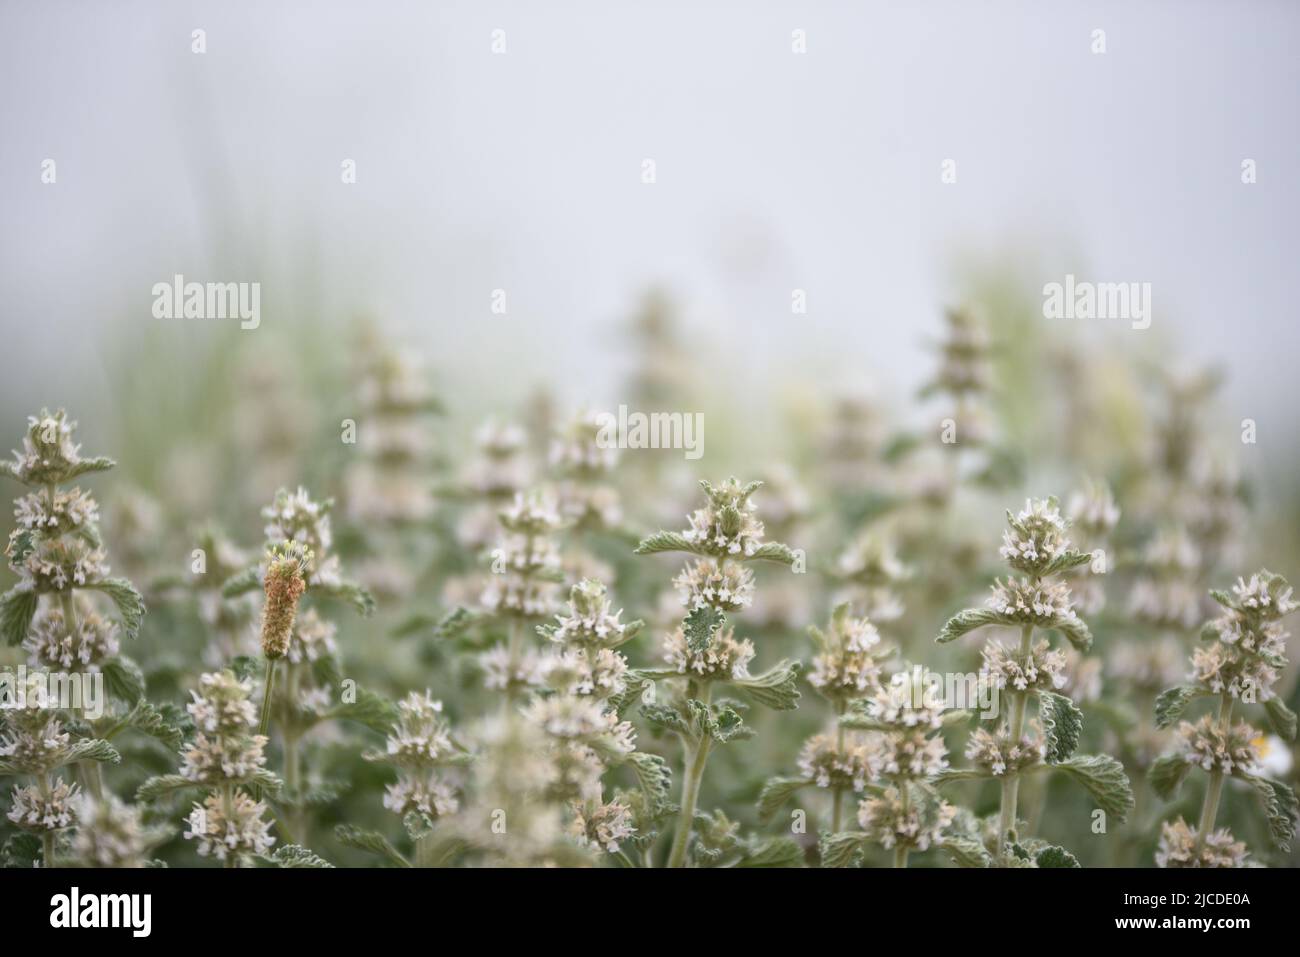 May 22, 2022, AlmazÃn, Spain: A Common Horehound (Marrubium Vulgare) is seen at a field during spring. According to AEMET, the Spanish meteorological agency, it was the fourth driest spring since 1961, and the second driest of the 21st century, only behind 2005. Precipitation in the country as a whole was 33% below normal and the average temperature was 12.5ÂºC. This temperature was 0.4ÂºC higher than the average of last decades. (Credit Image: © Jorge Sanz/SOPA Images via ZUMA Press Wire) Stock Photo